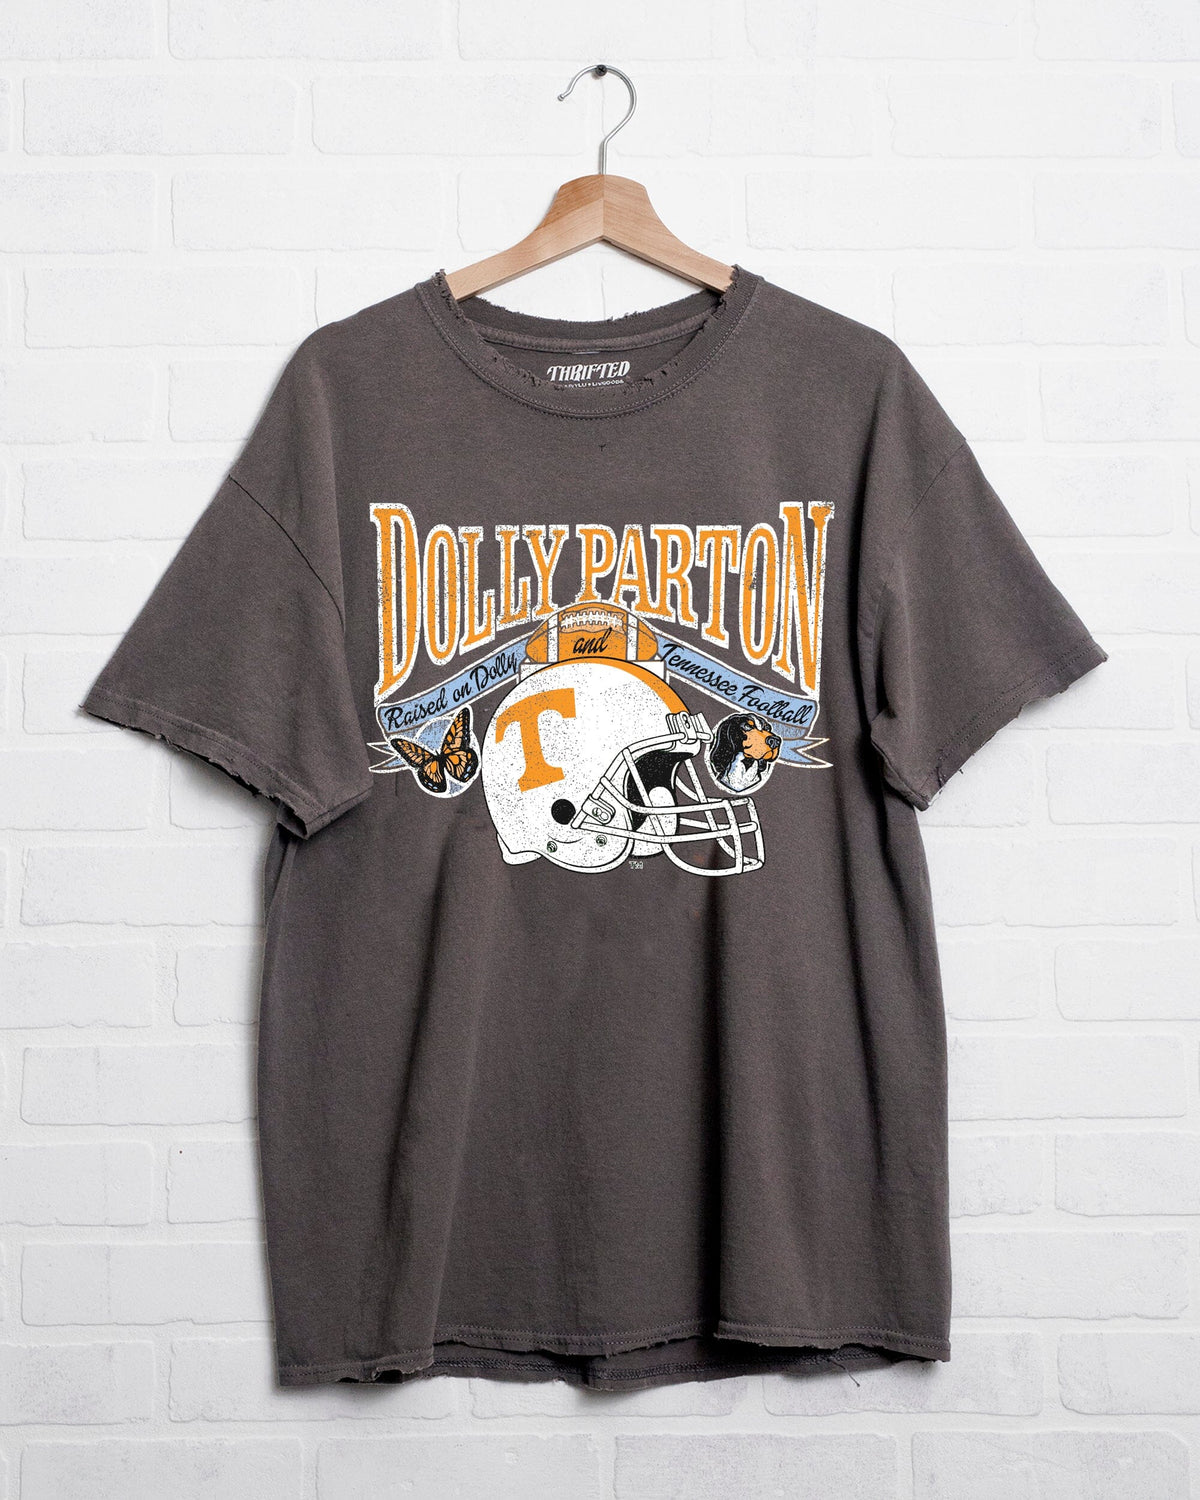 Dolly Parton Raised on Dolly & Tennessee Football Charcoal Thrifted Distressed Tee